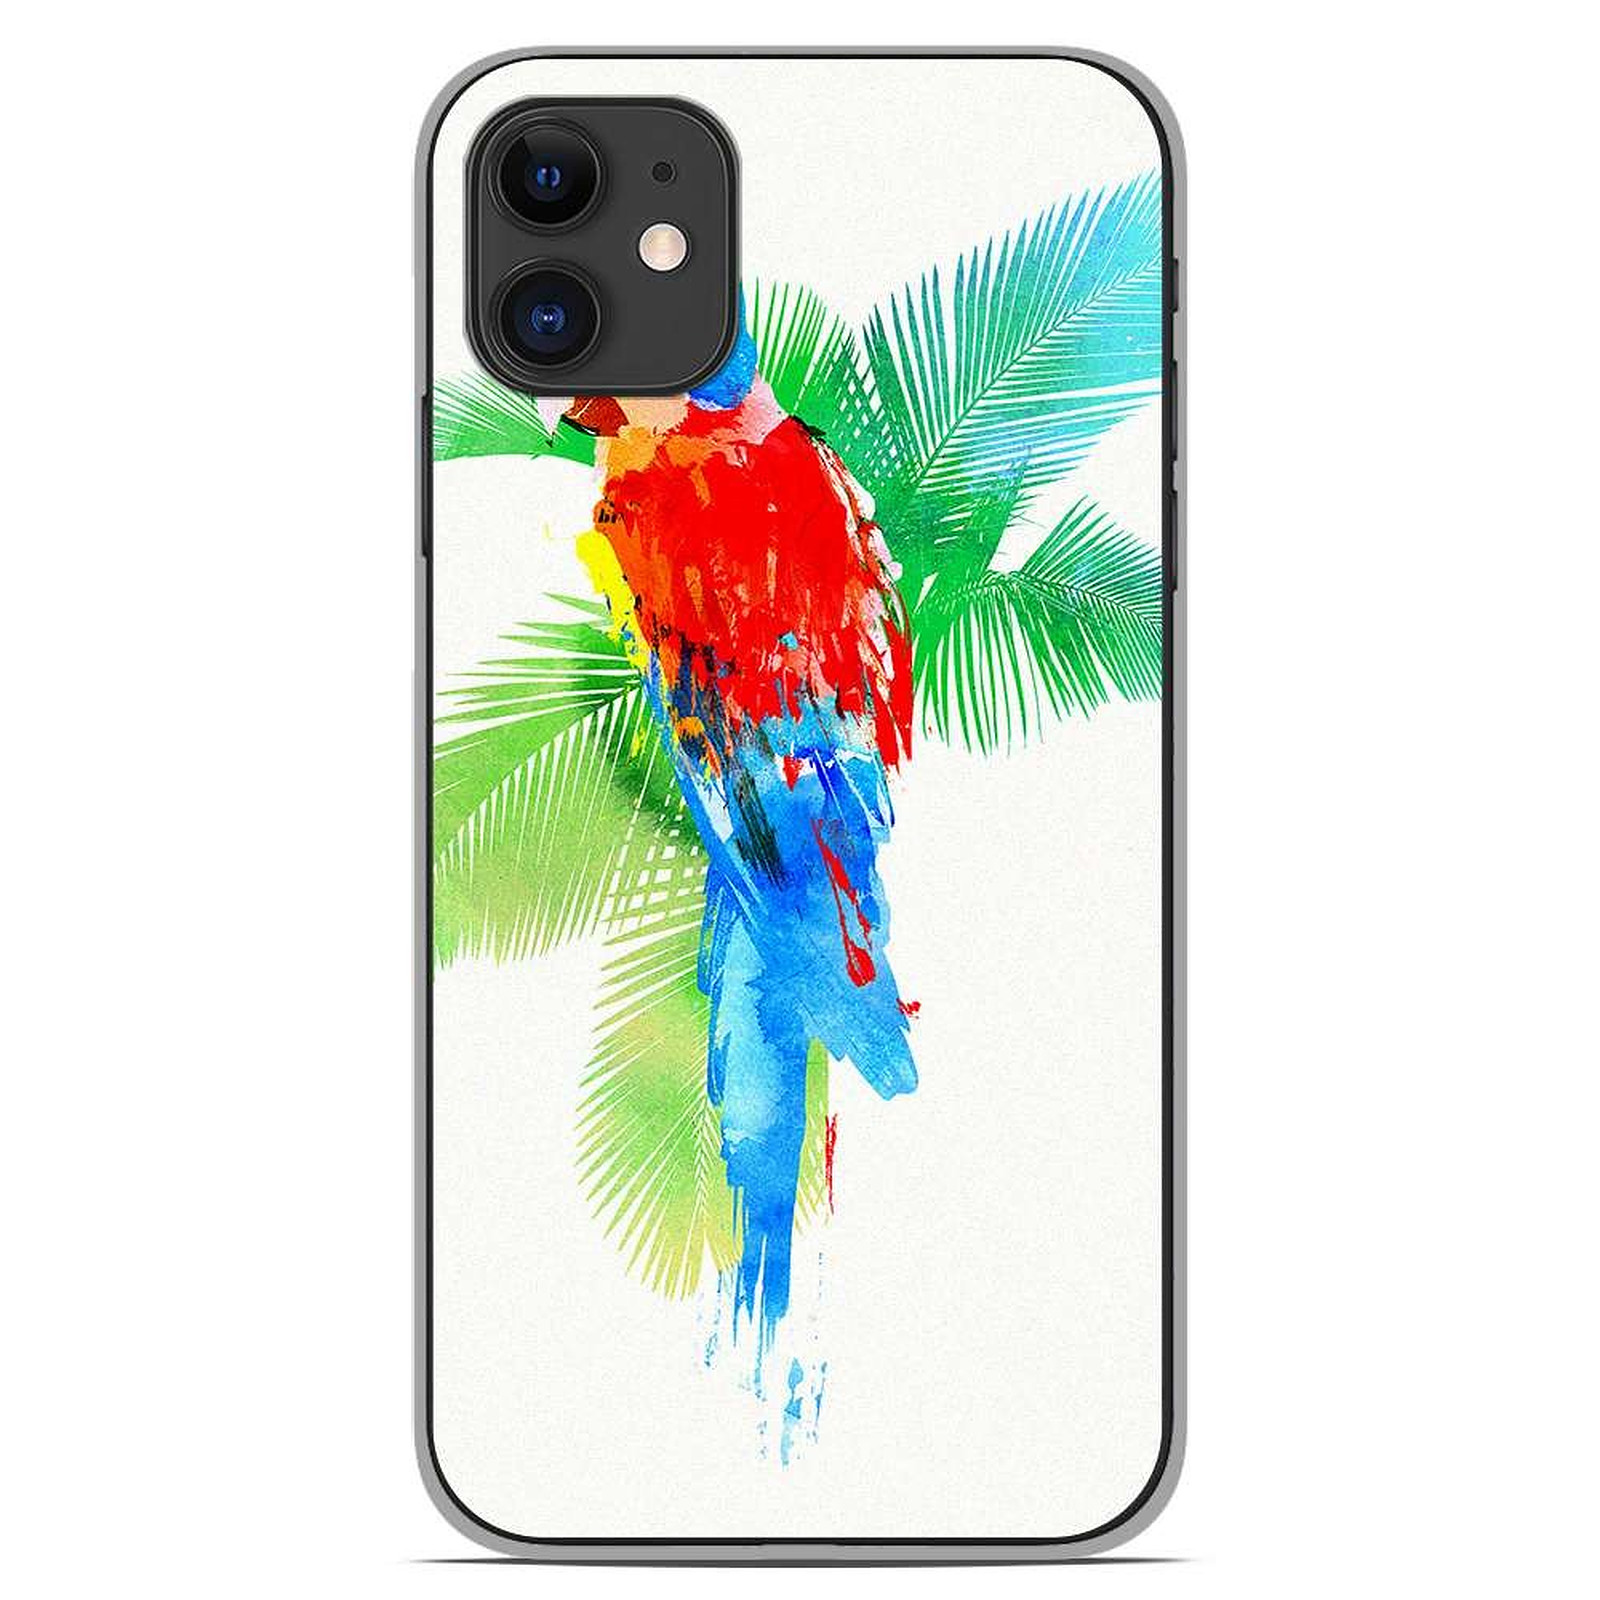 1001 Coques Coque silicone gel Apple iPhone 11 motif RF Tropical party - Coque telephone 1001Coques